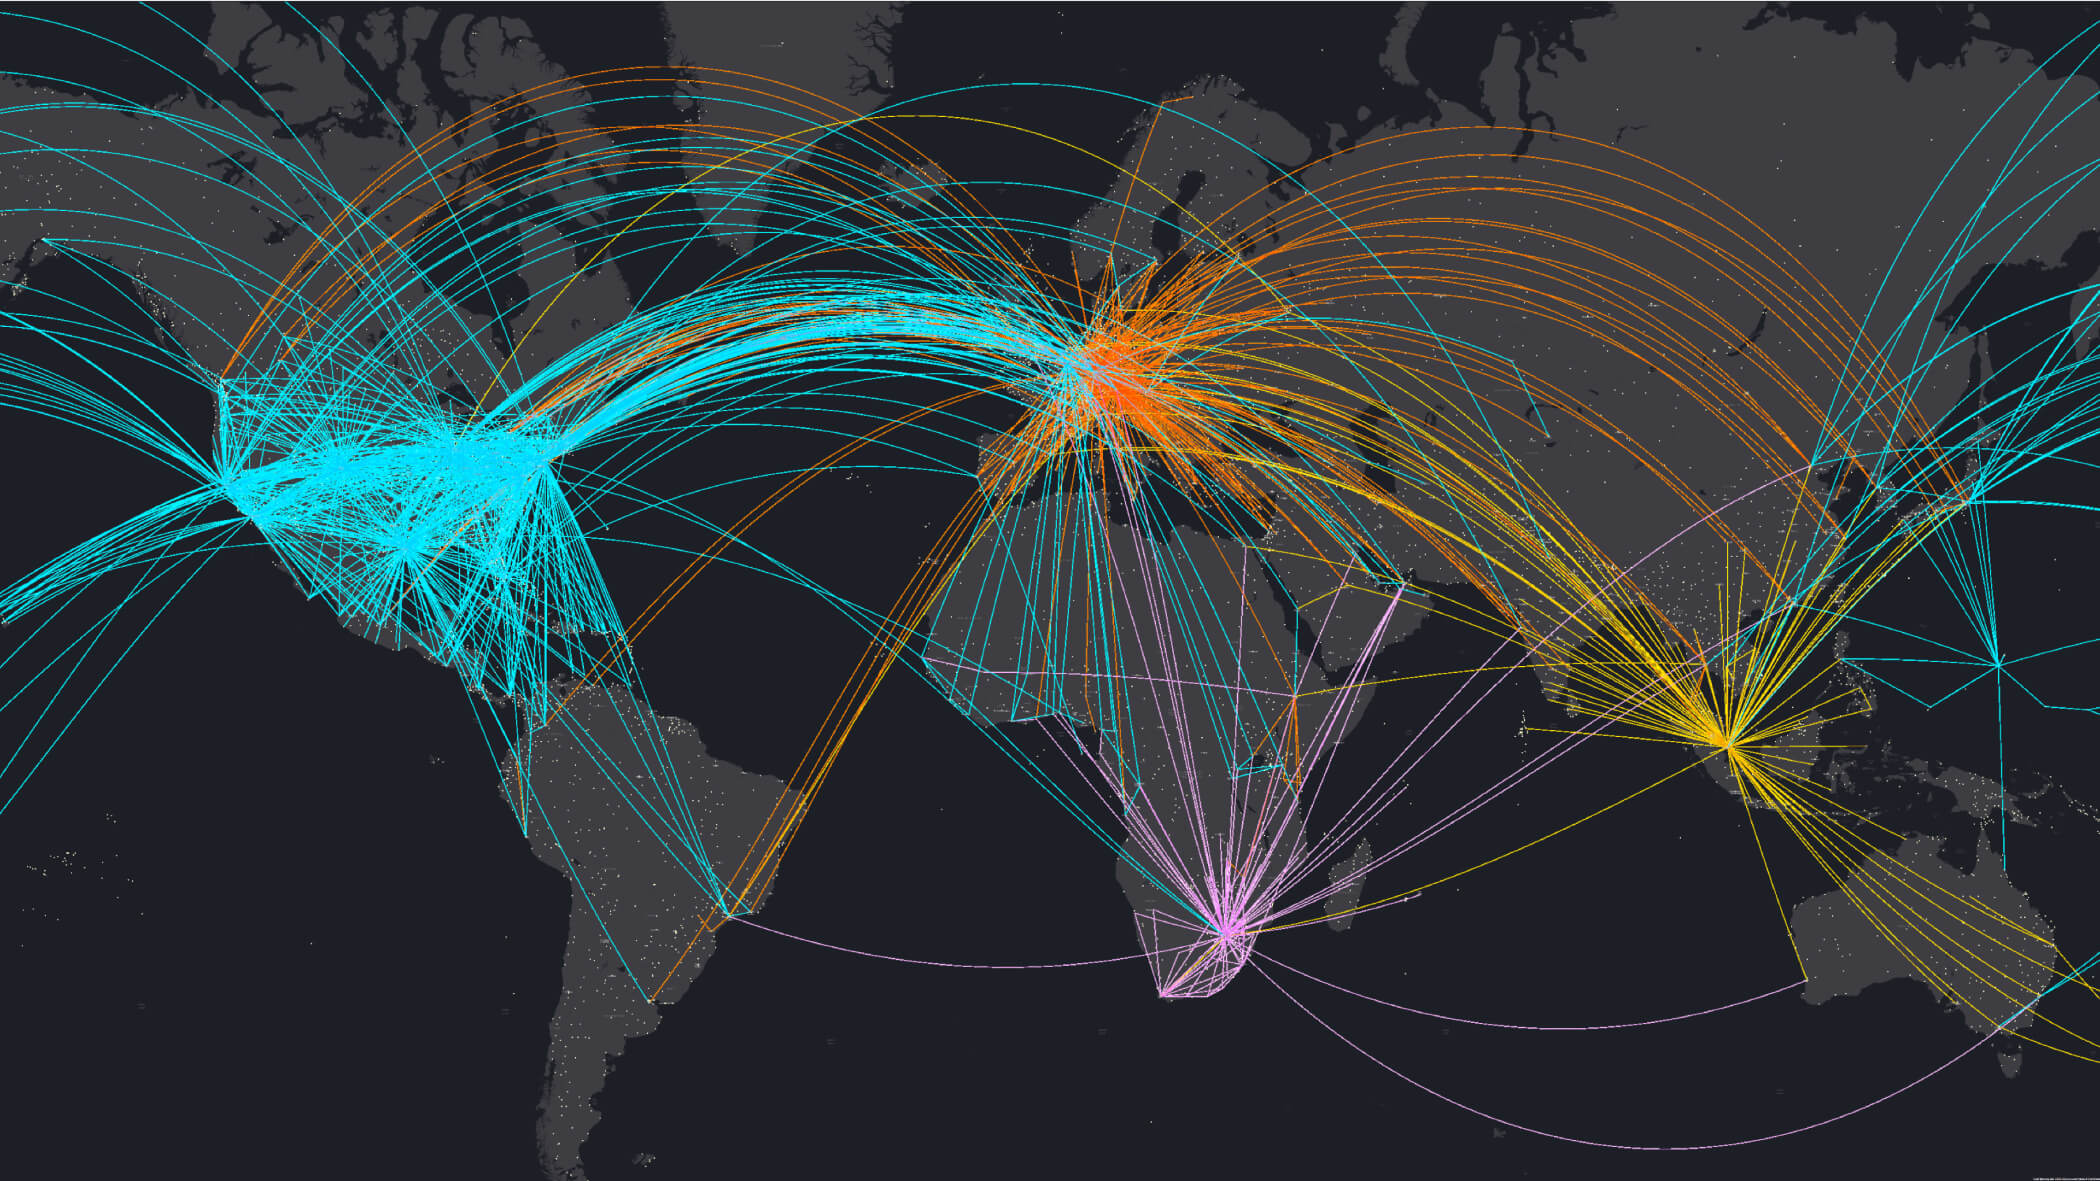 This map shows all known connections between origin and destination airports across the globe with colorful bright colors atop a dark, simple basemap